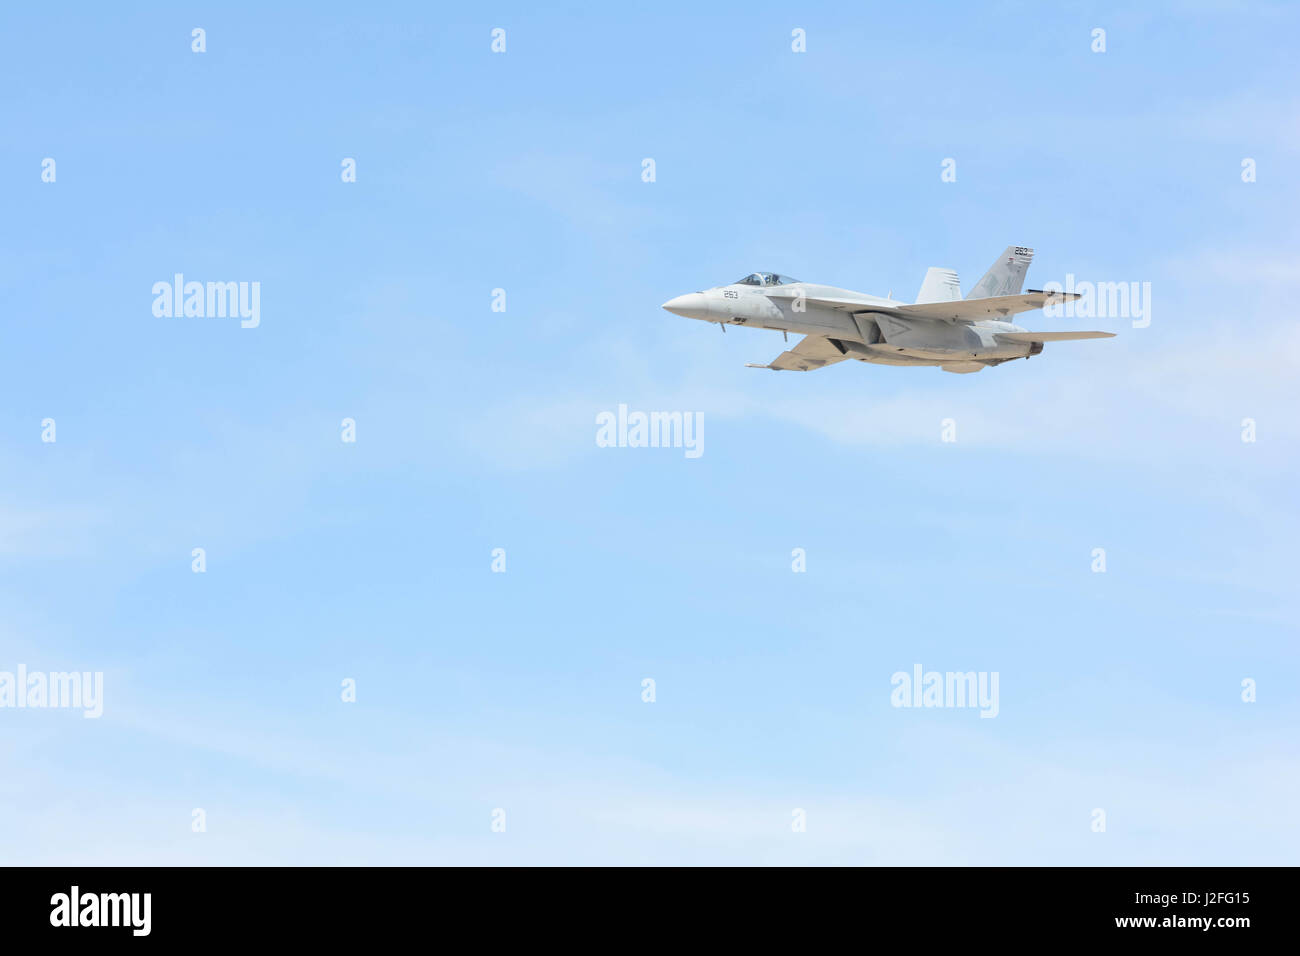 Lancaster, USA - March 25, 2017: U.S. Navy Tac Demo - F/A-18F Super Hornet on display during Los Angeles County Air Show at the William J Fox Airfield Stock Photo